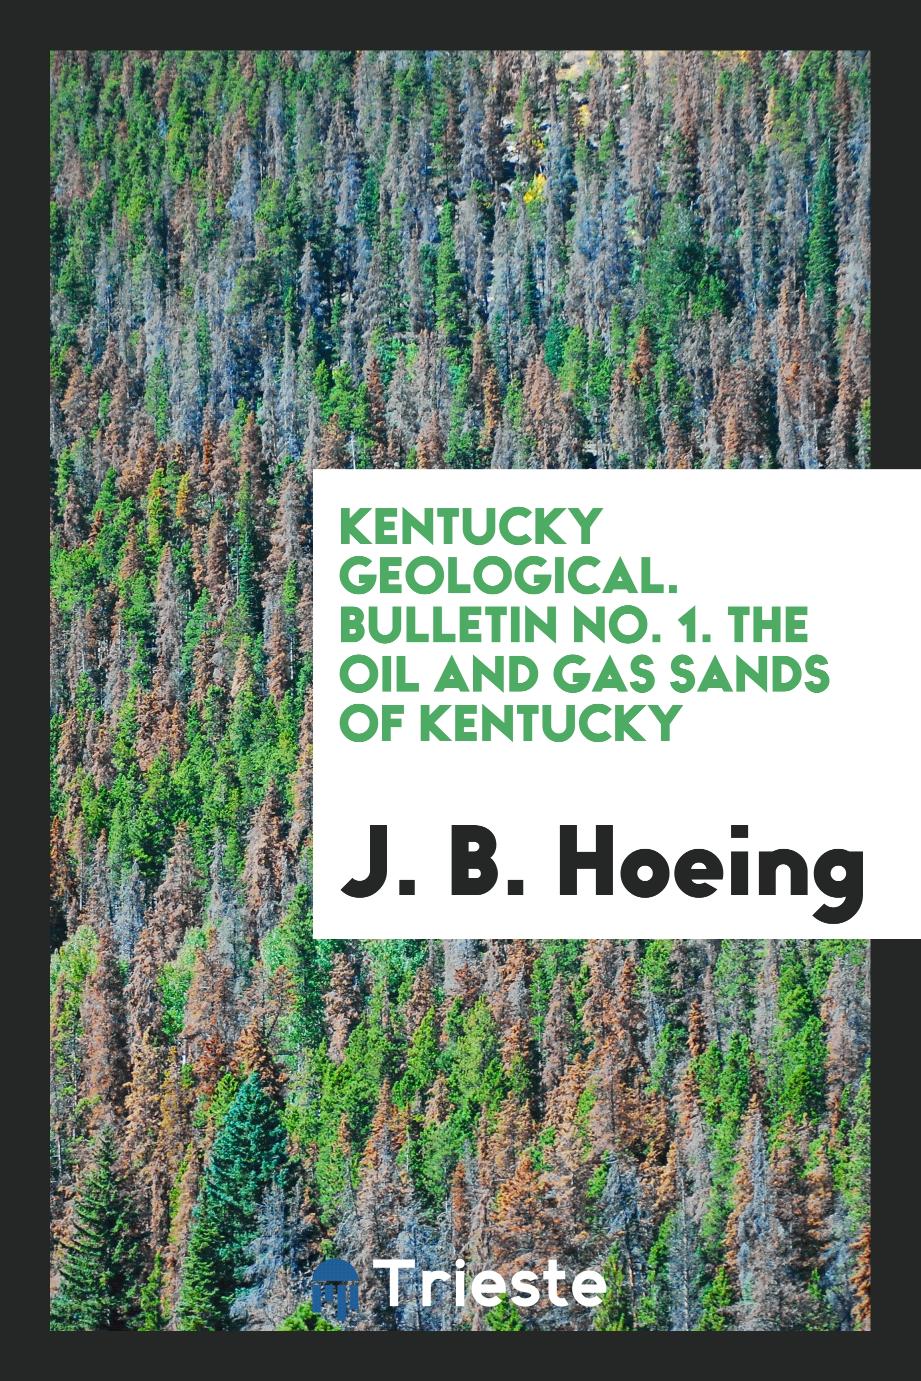 Kentucky Geological. Bulletin No. 1. The Oil and Gas Sands of Kentucky